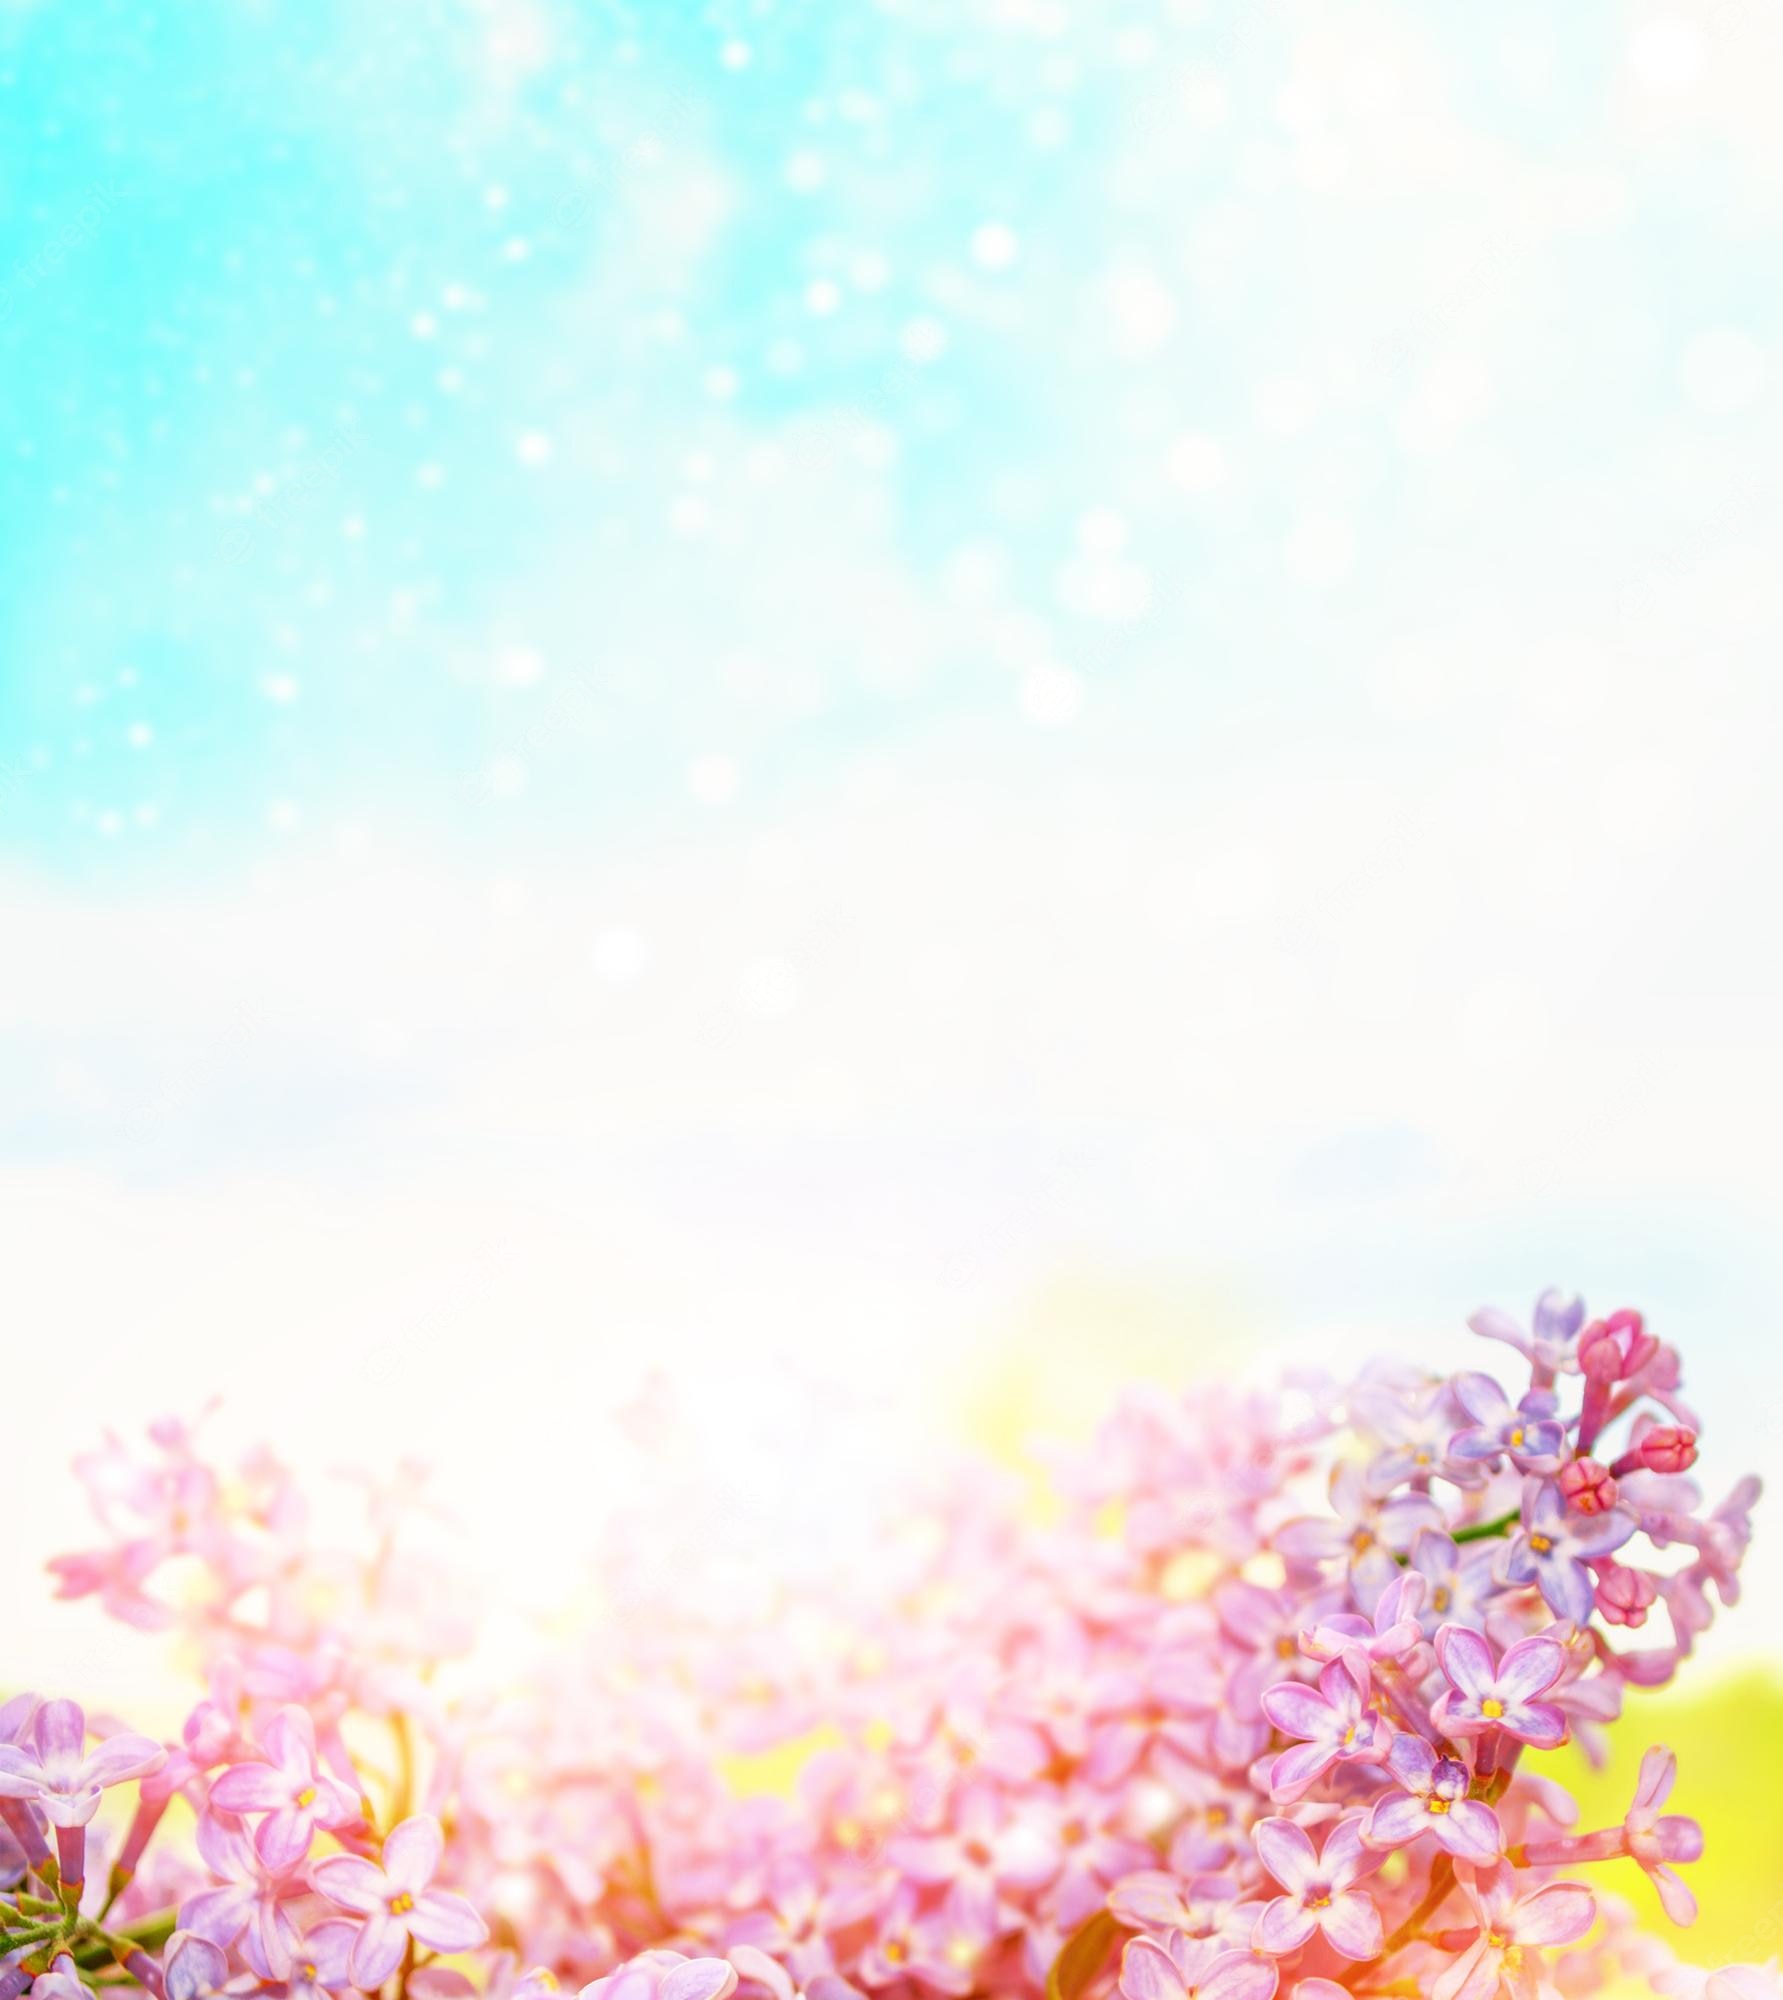 Colorful Spring Background Image